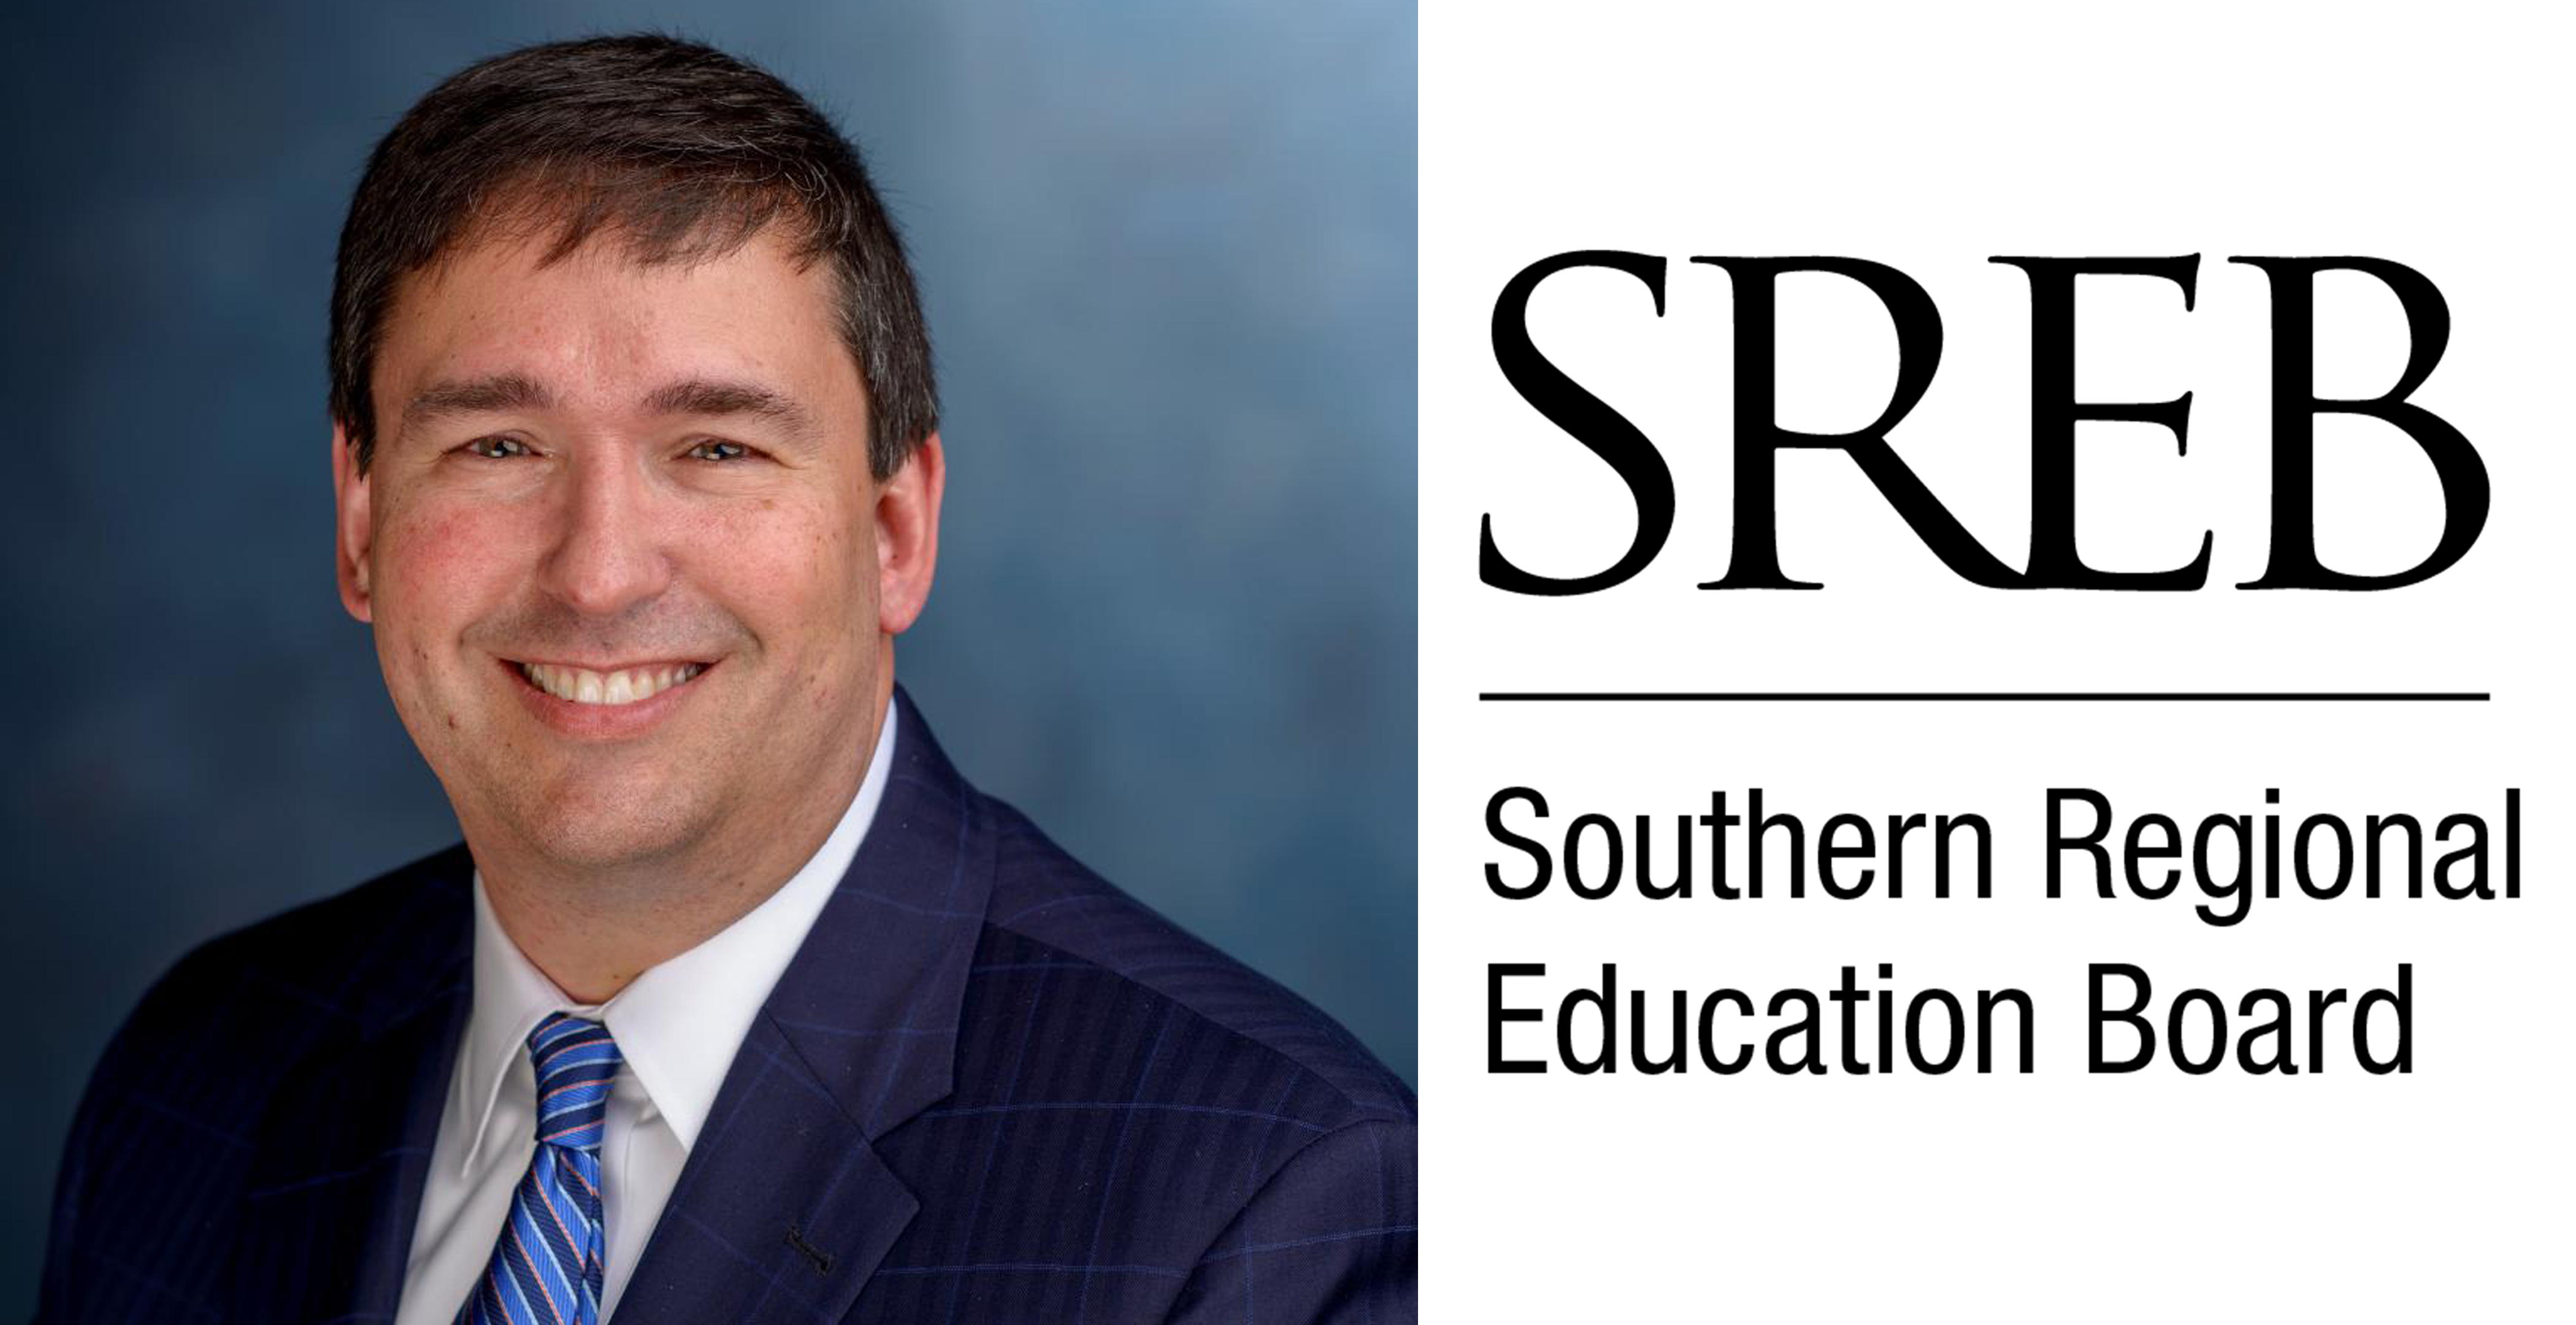 Profile photo of Stephen Pruitt on the left, the Southern Regional Education Board logo on the right